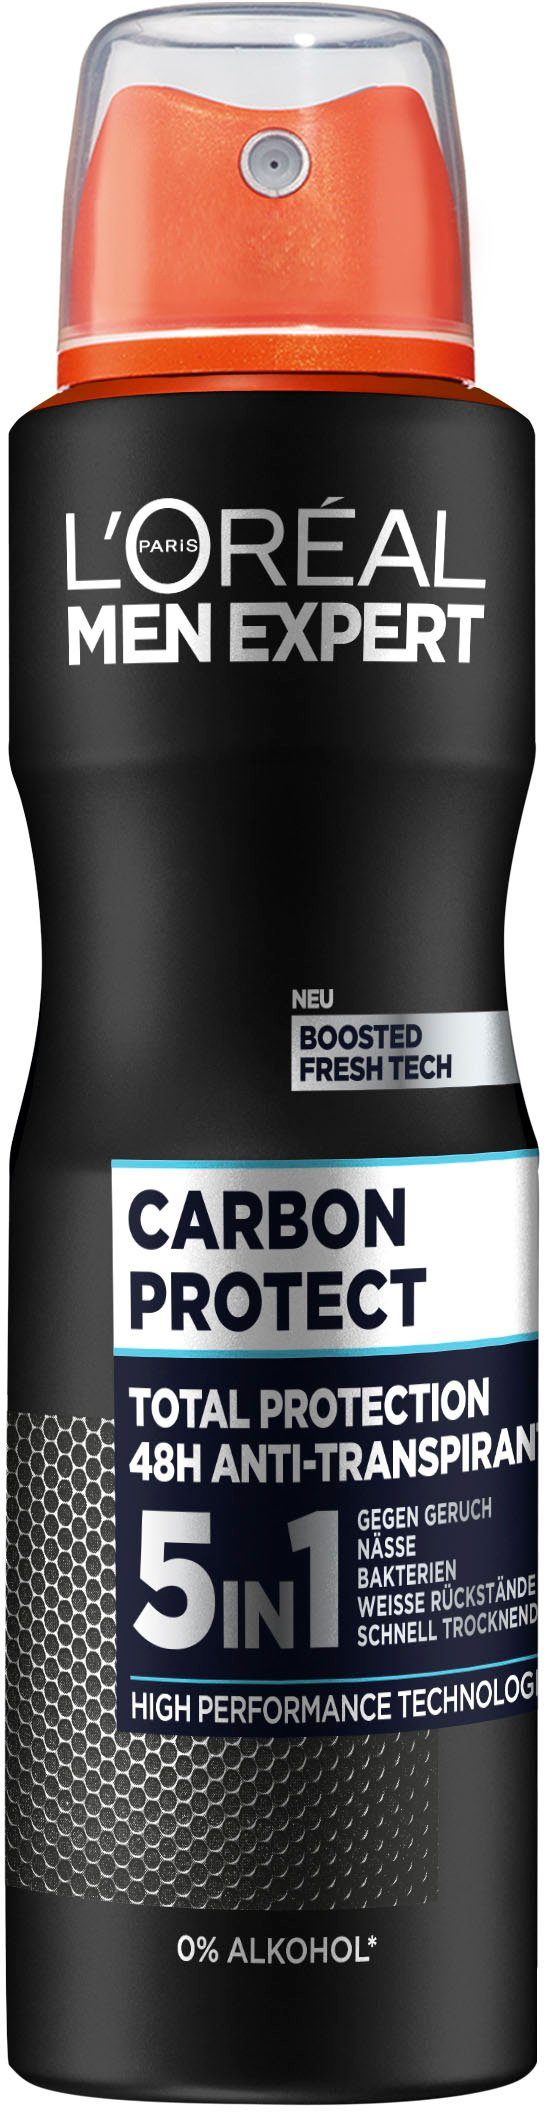 Carbon 6-tlg. MEN Packung, Deo-Spray L'ORÉAL 5-in-1, Spray Protect Deo EXPERT PARIS